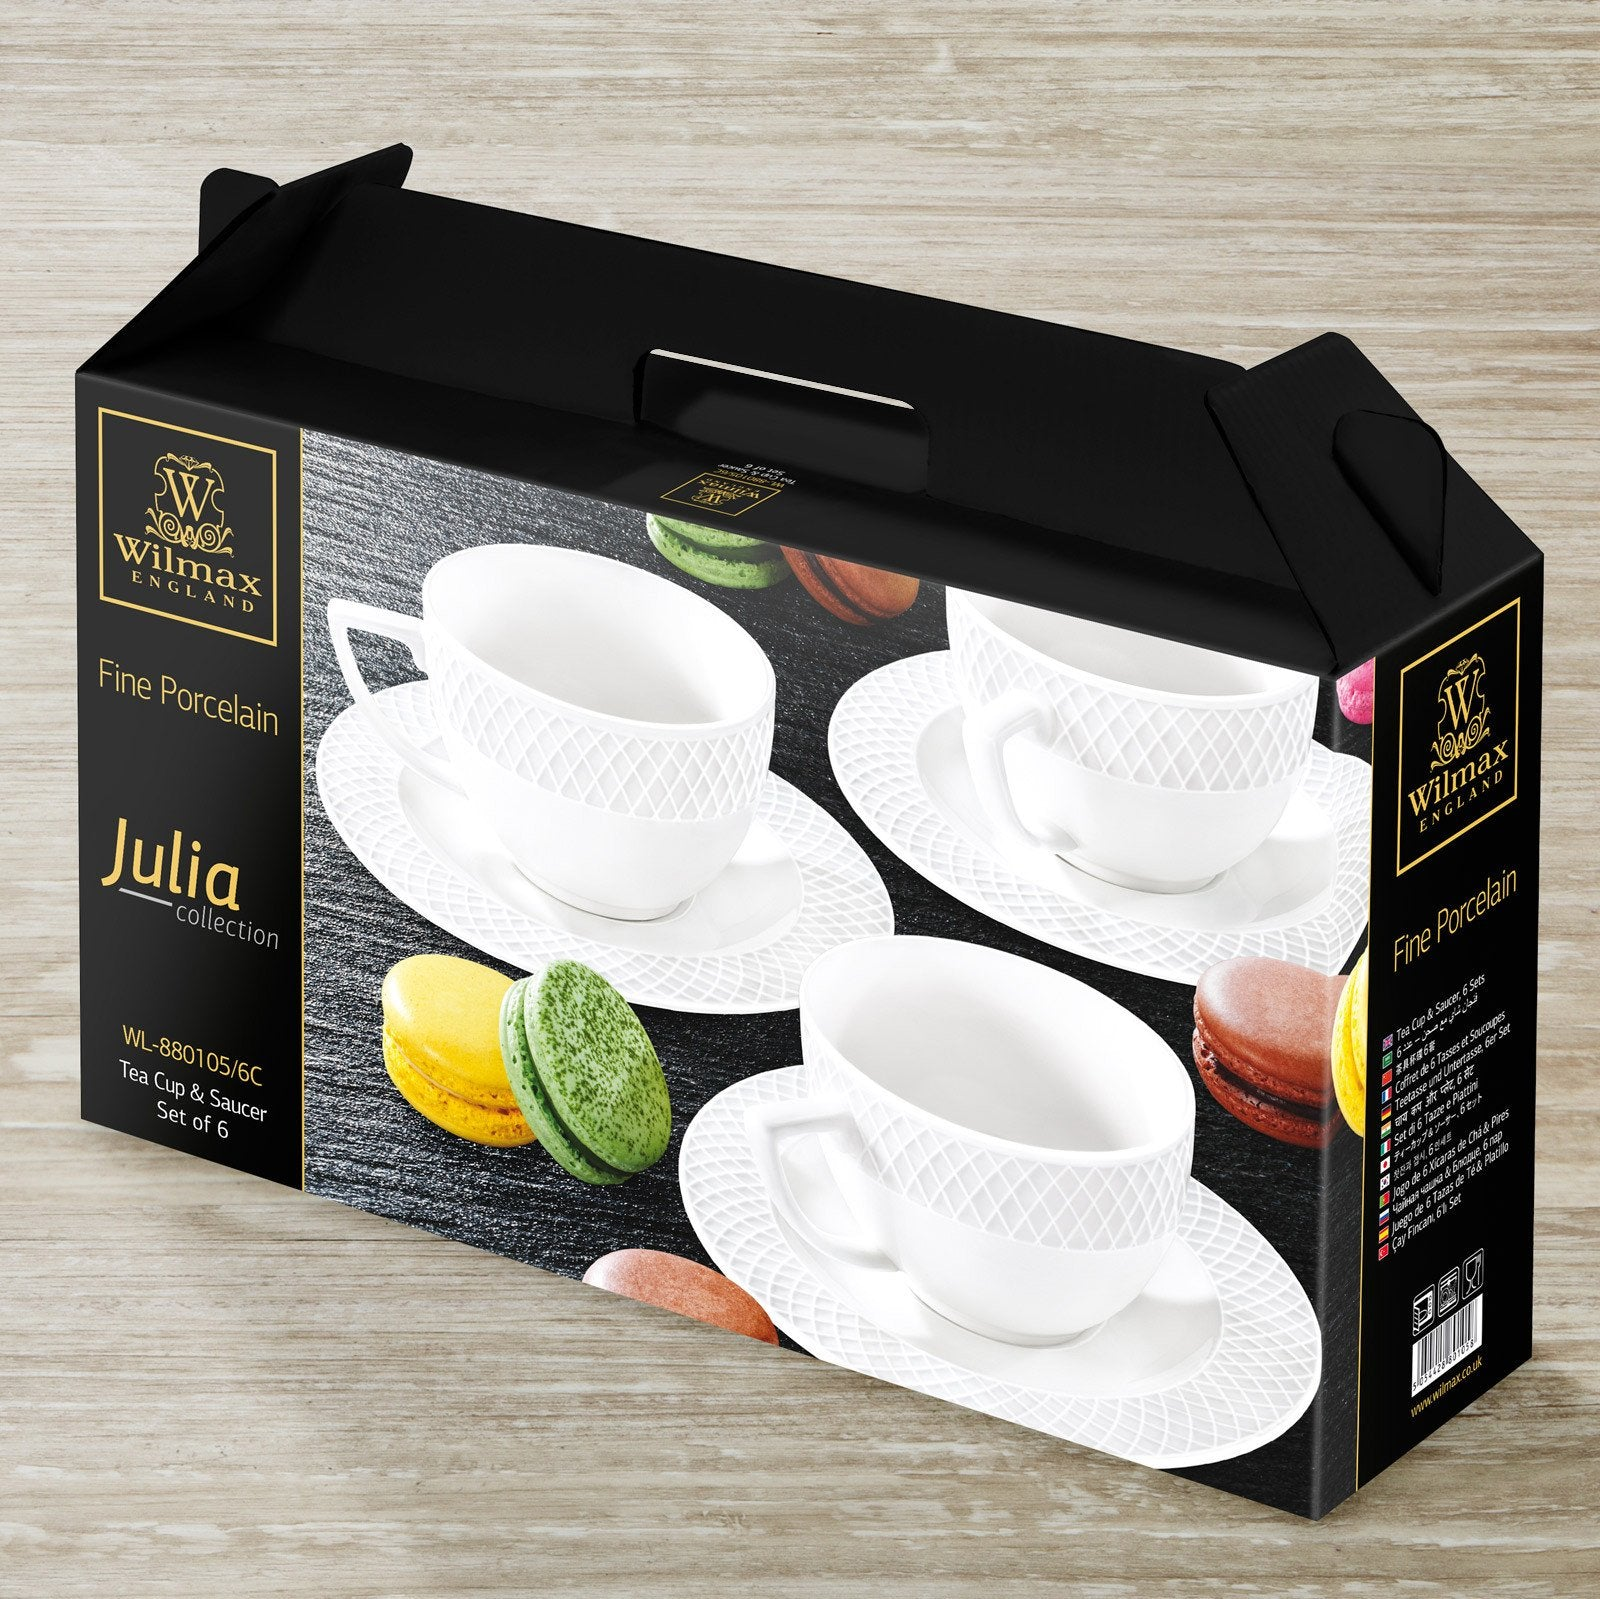 White 8 Oz Tea Cup & 6" inch Saucer Set Of 6 In Gift Box, Goodies N Stuff